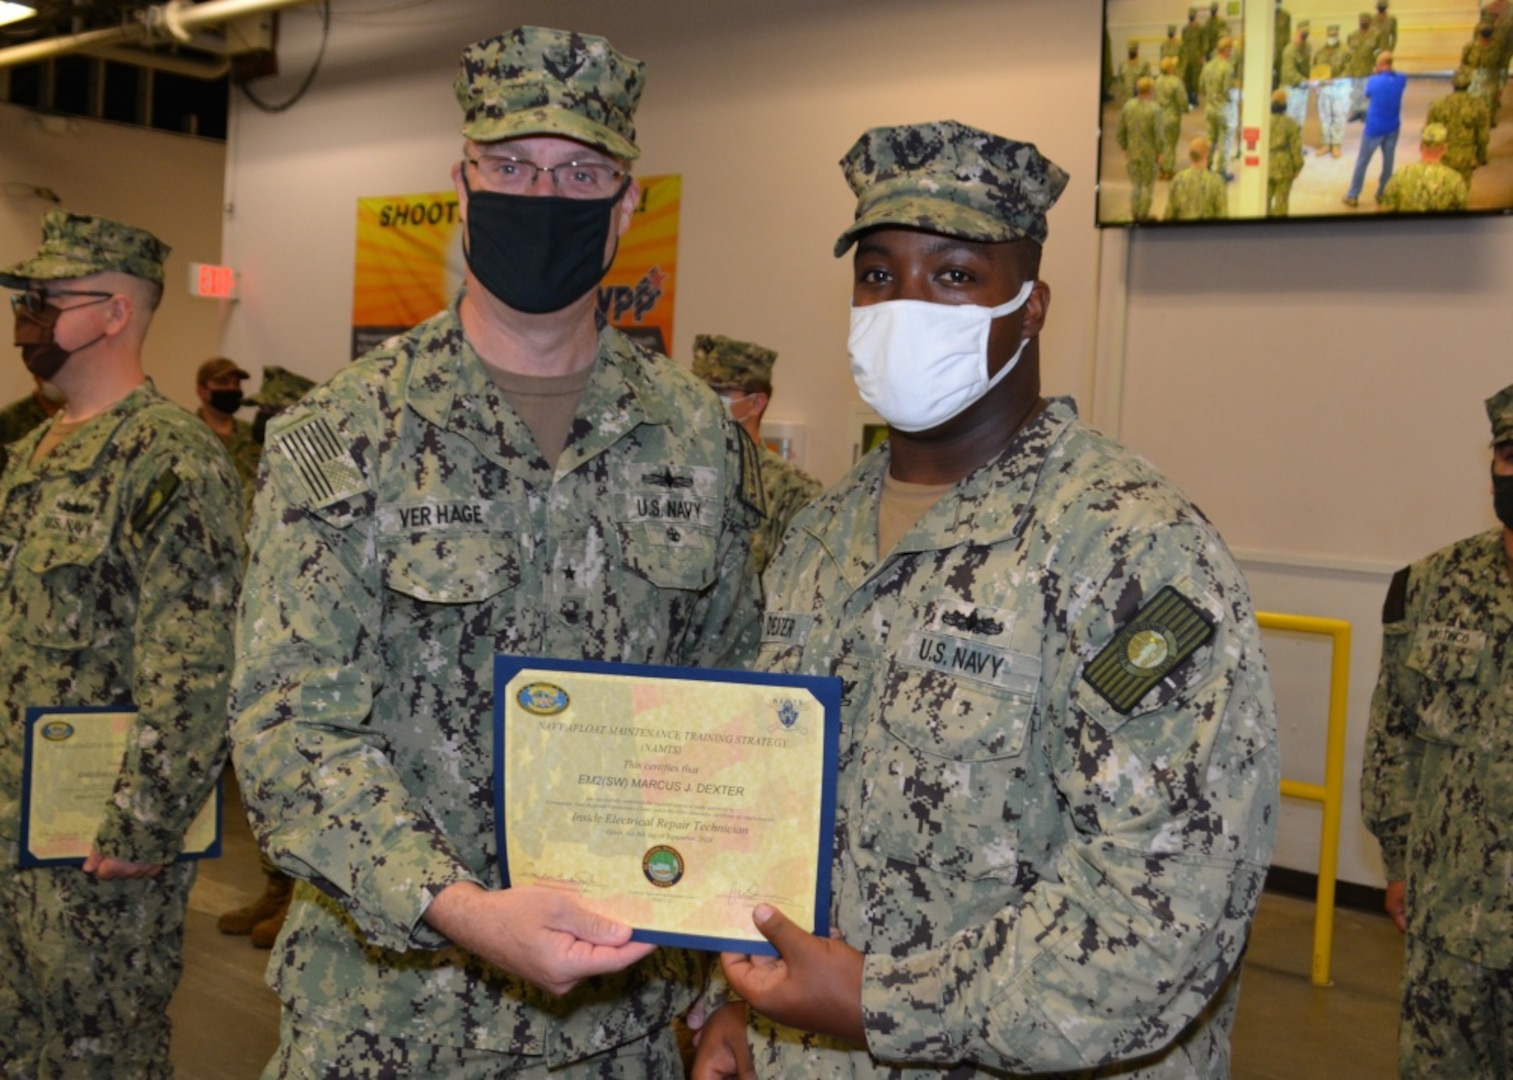 Rear Adm. Eric Ver Hage, Commander, Navy Regional Maintenance Center (left) presents a Navy Afloat Maintenance Training Strategy (NAMTS) Navy Enlisted Classification (NEC) Certificate to EM2 Marcus J. Dexter at Southeast Regional Maintenance Center (SERMC).